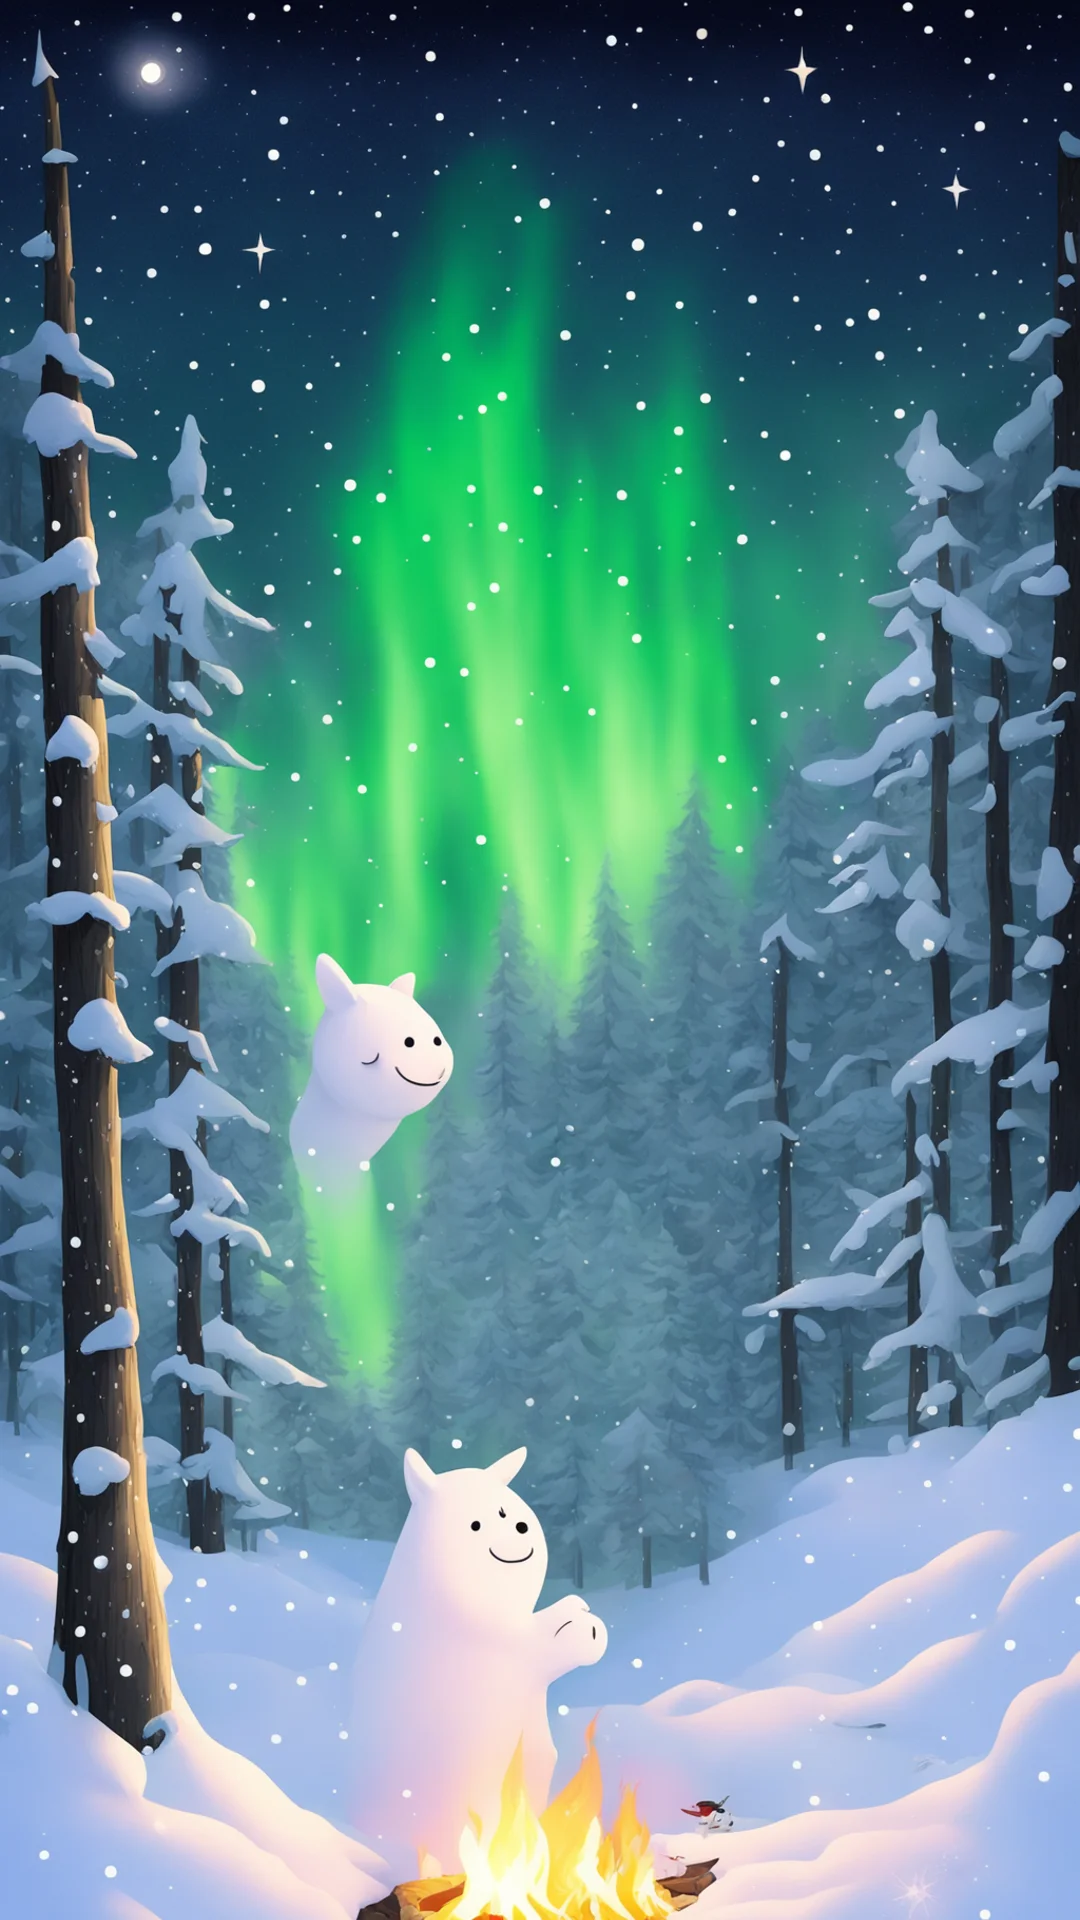 moomintroll and snorkmaiden on a snowy night in the forest by a campfire hugging and looking at the aurora and stars tall